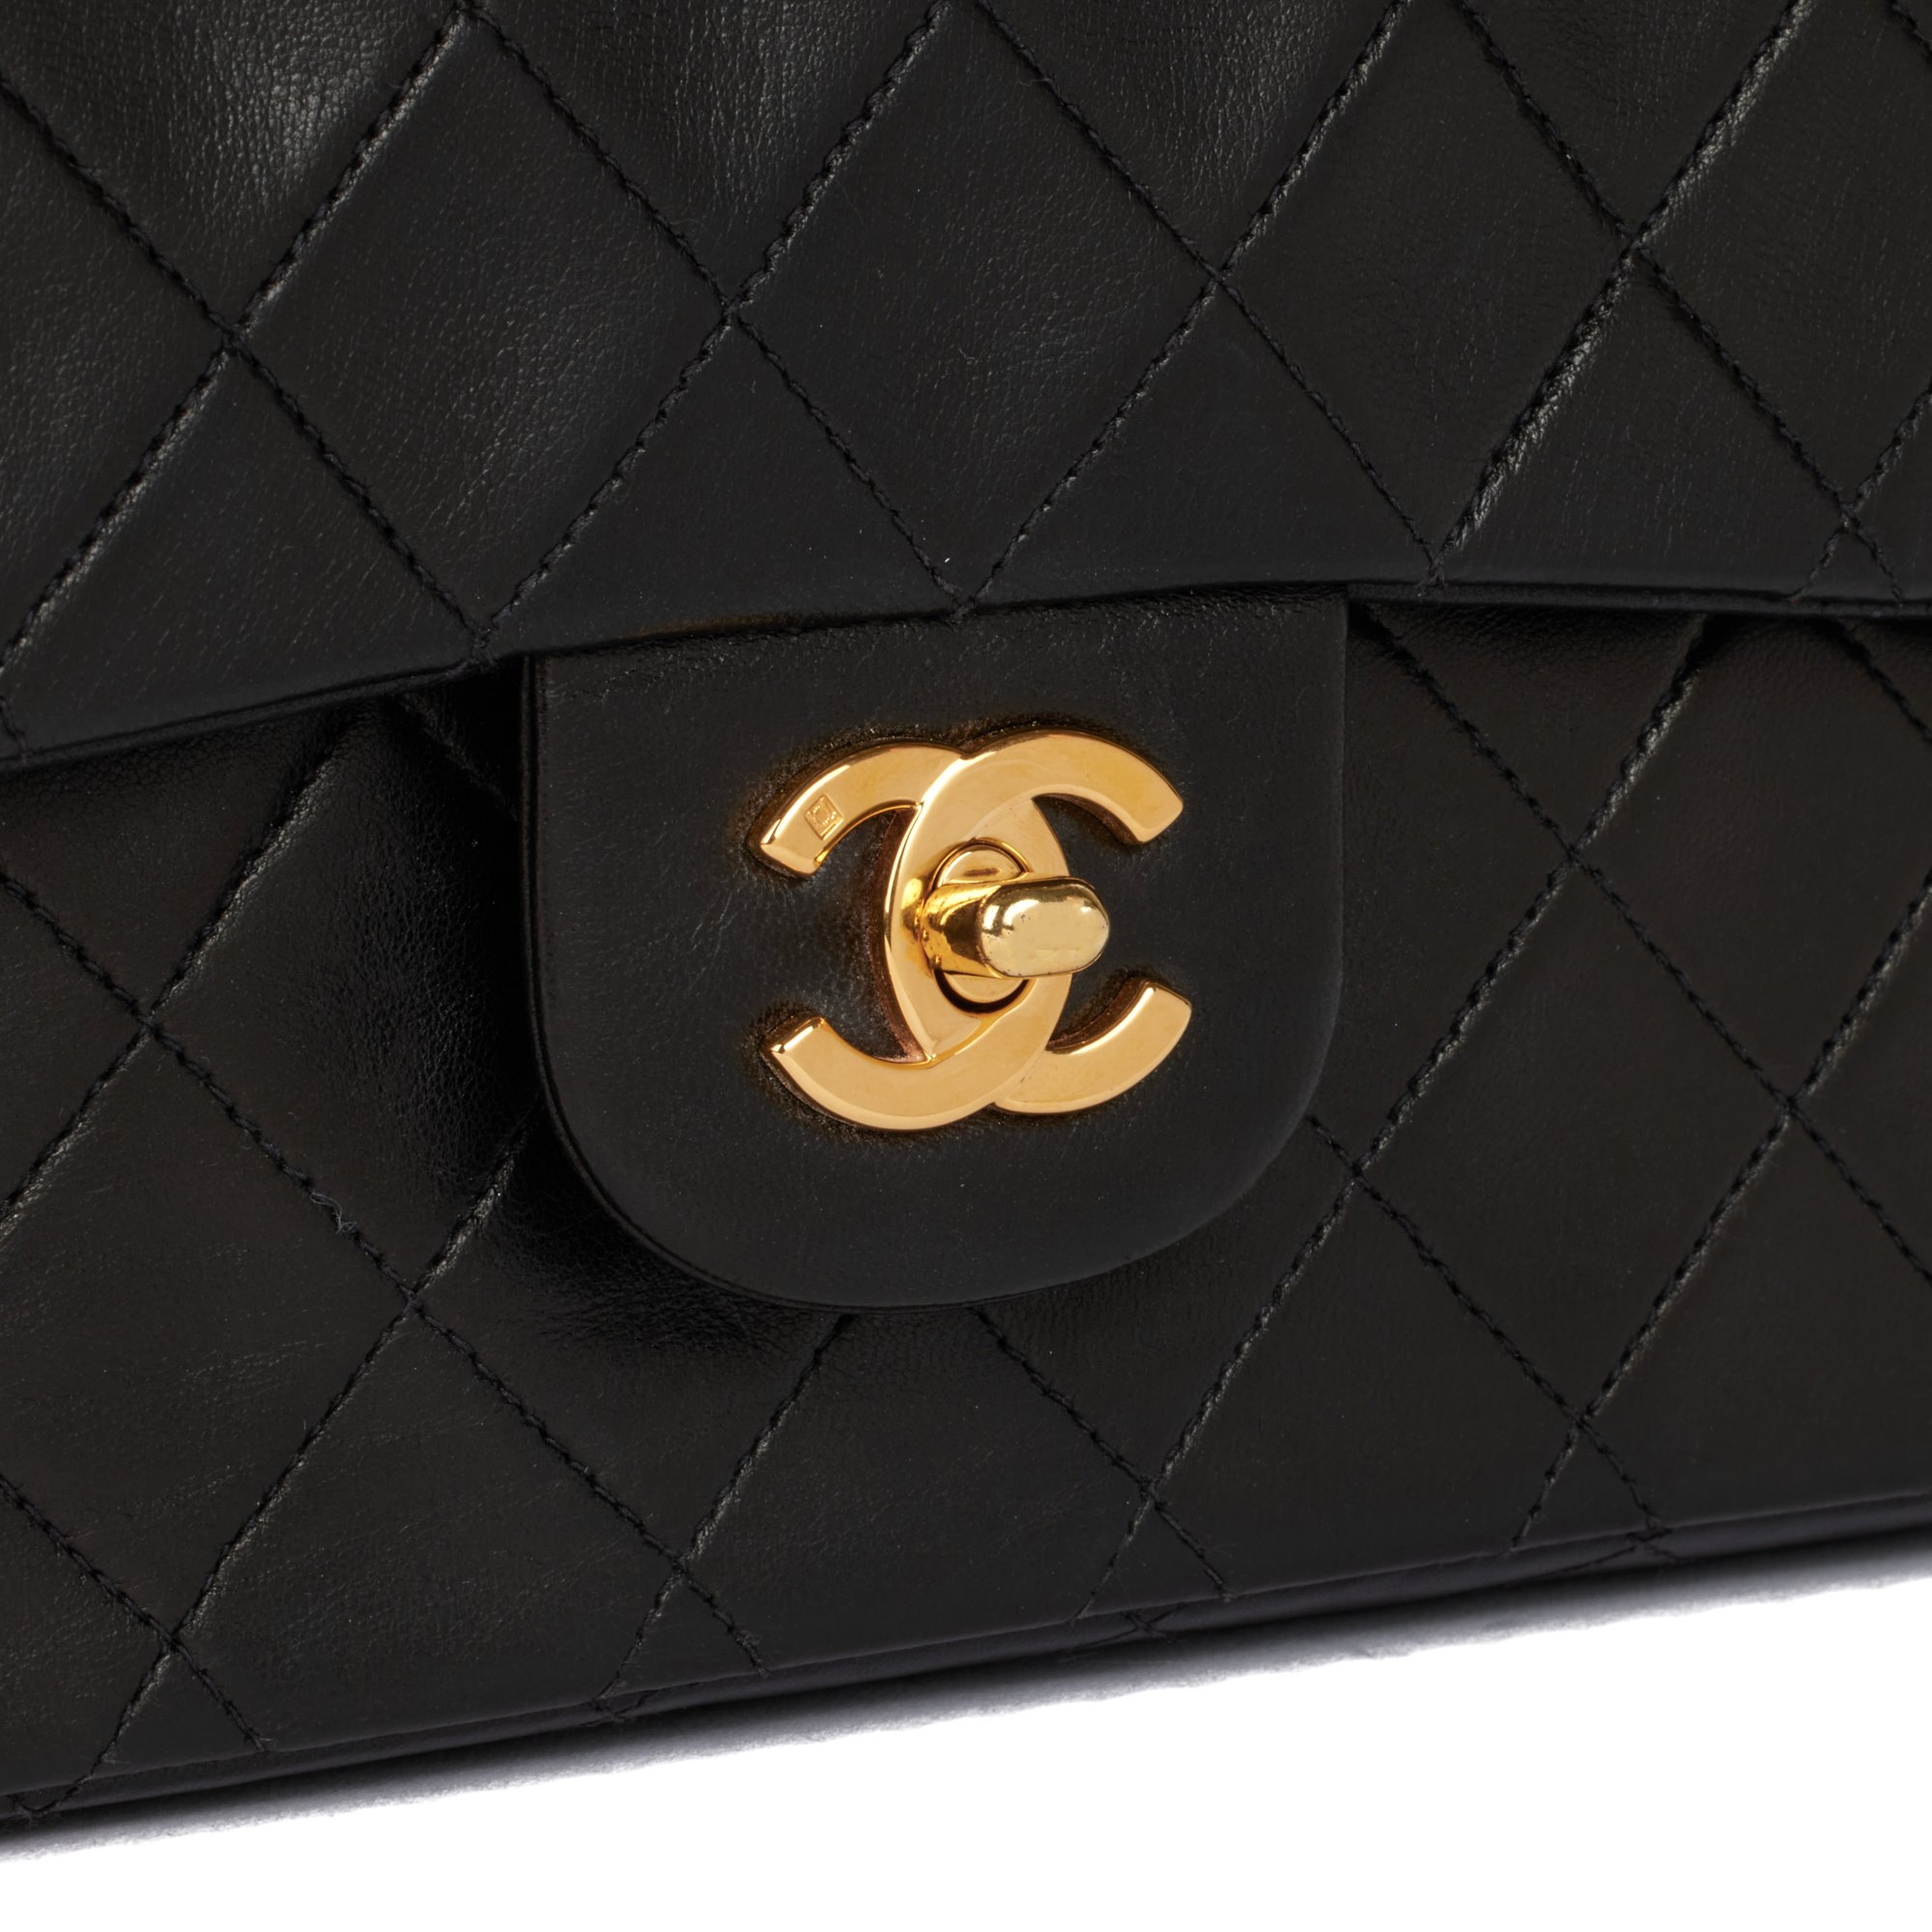 Chanel Black Quilted Lambskin Vintage Medium Classic Double Flap Bag